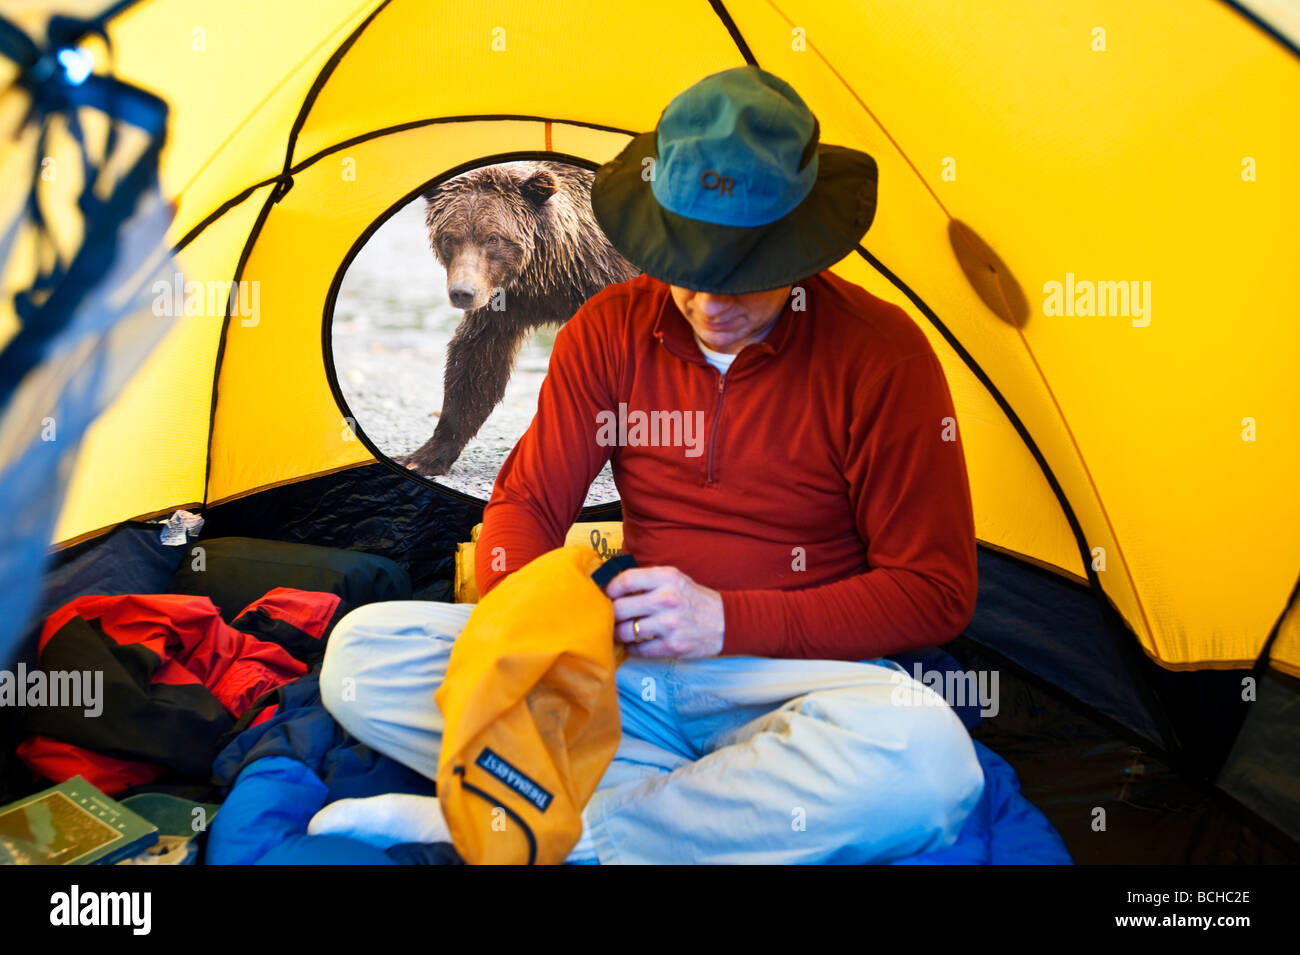 COMPOSITE Grizzly bear looking through tent door with man inside, Alaska COMPOSITE Stock Photo